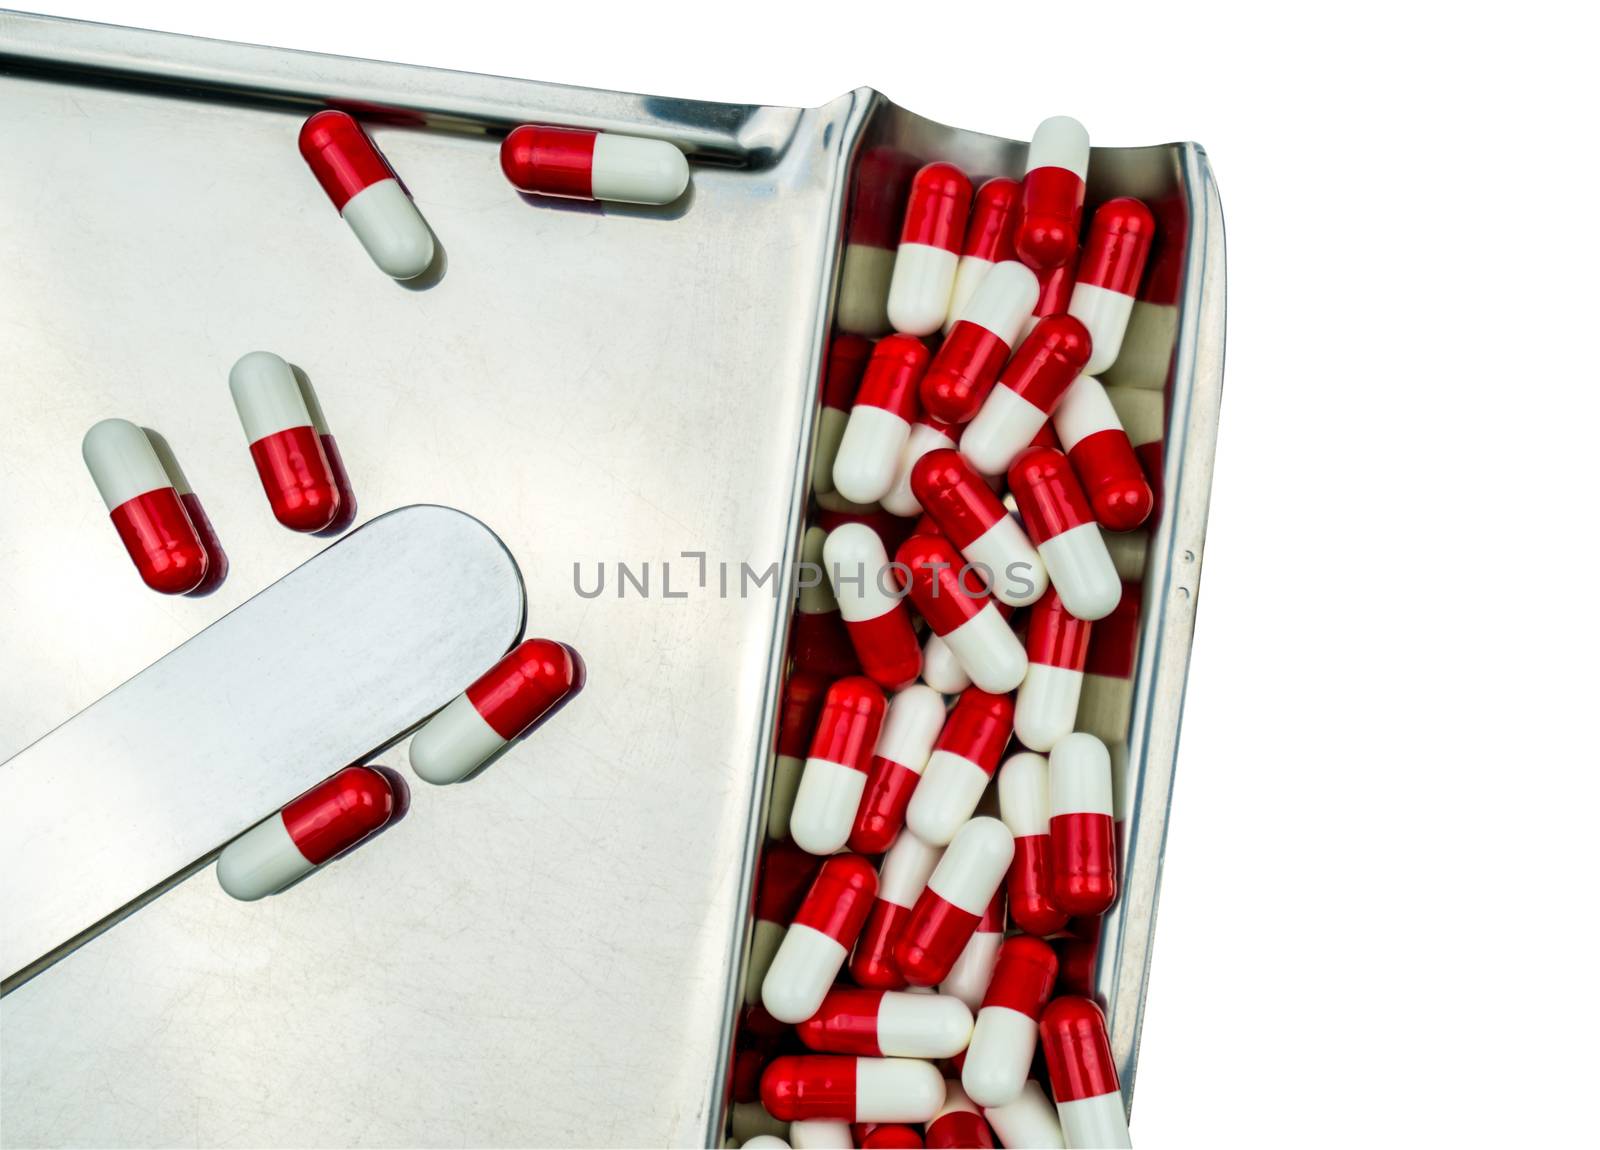 Top view of red, white antibiotic capsules pills isolated on stainless steel drug tray with clipping path, drug resistance concept. Drug use with reasonable.